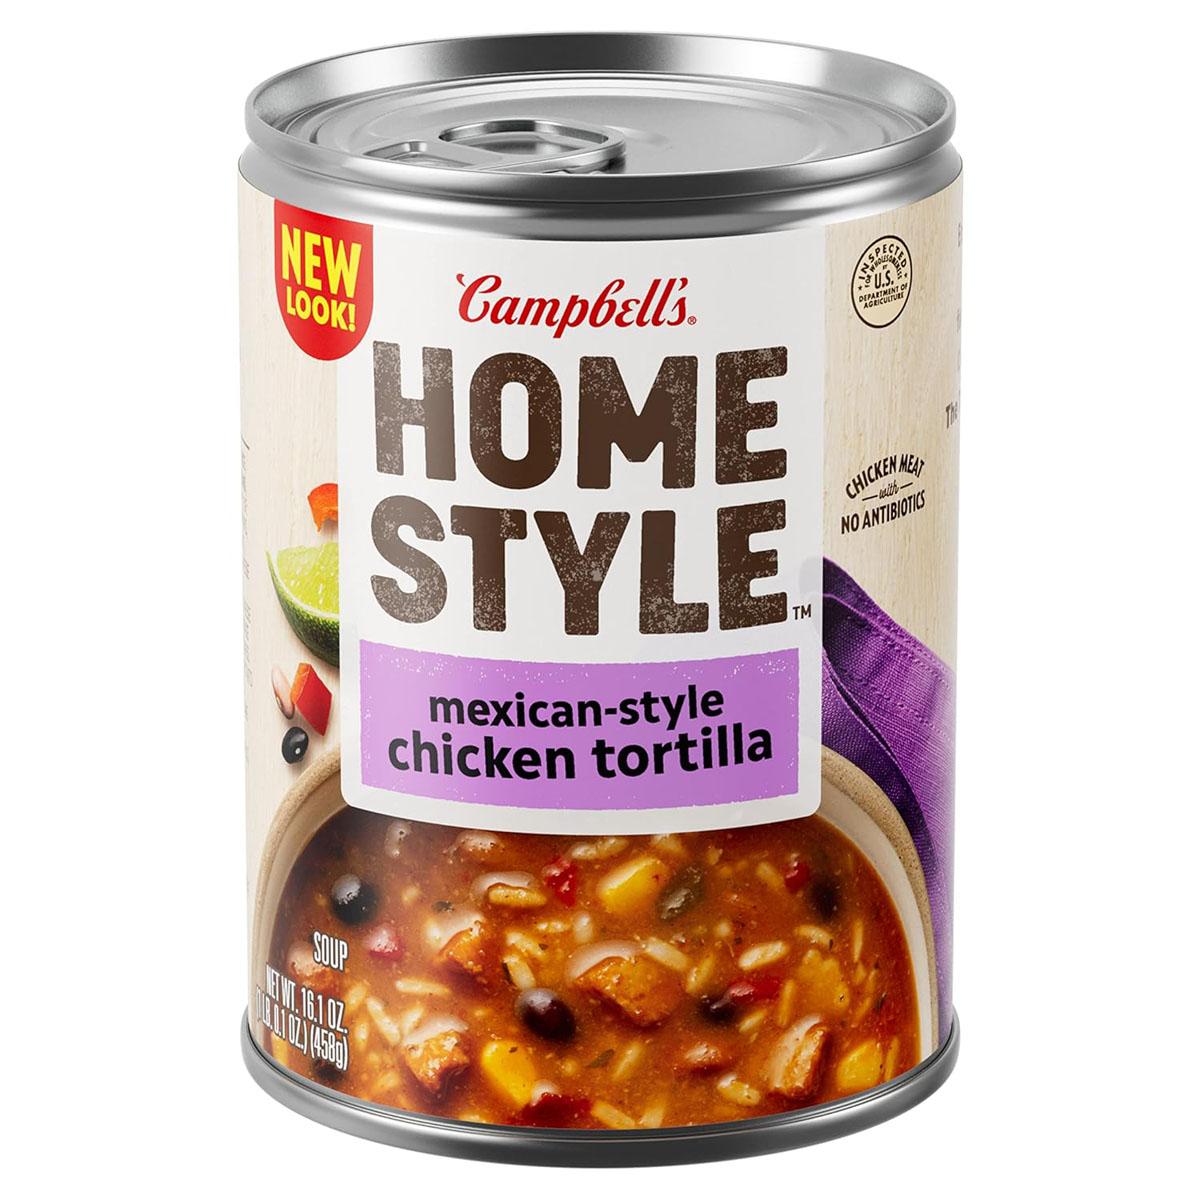 Campbells Homestyle Soup for $1.50